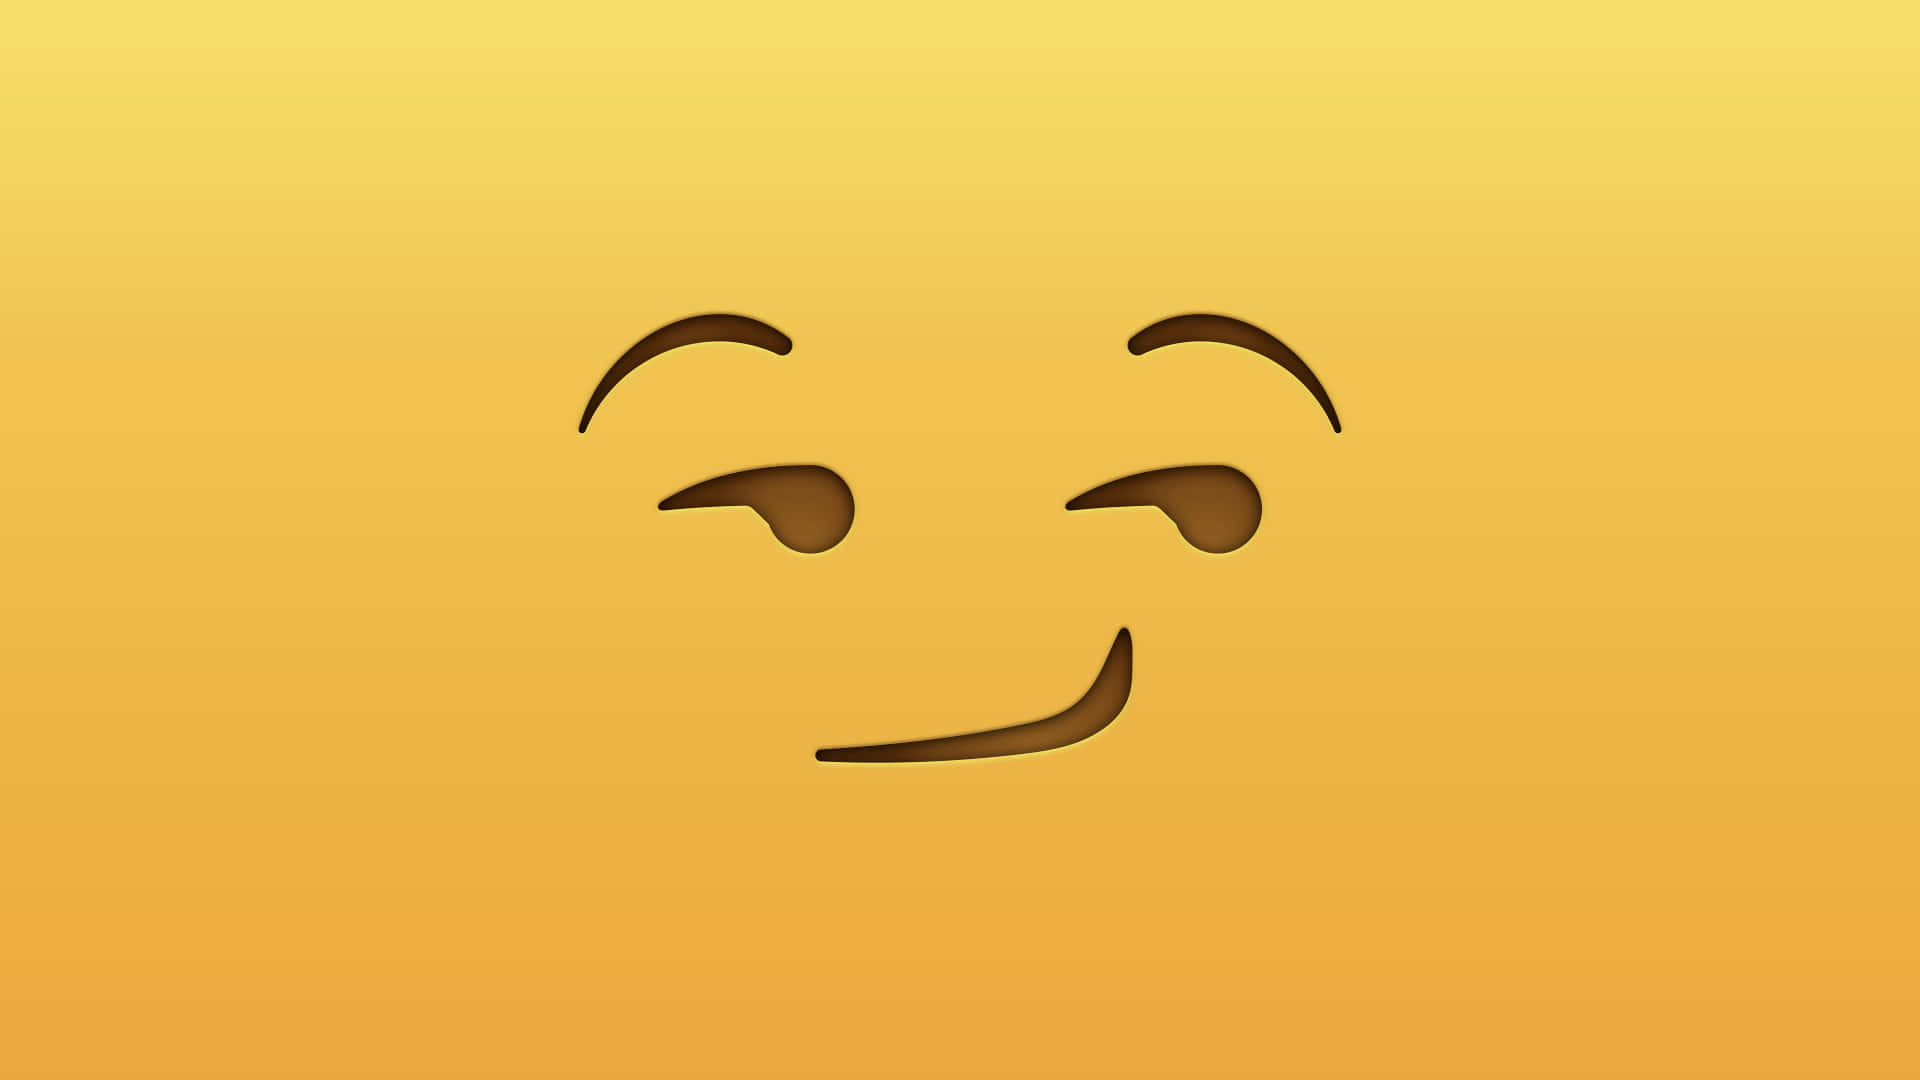 "put A Smile On Your Face With This Cute Emoji!" Wallpaper